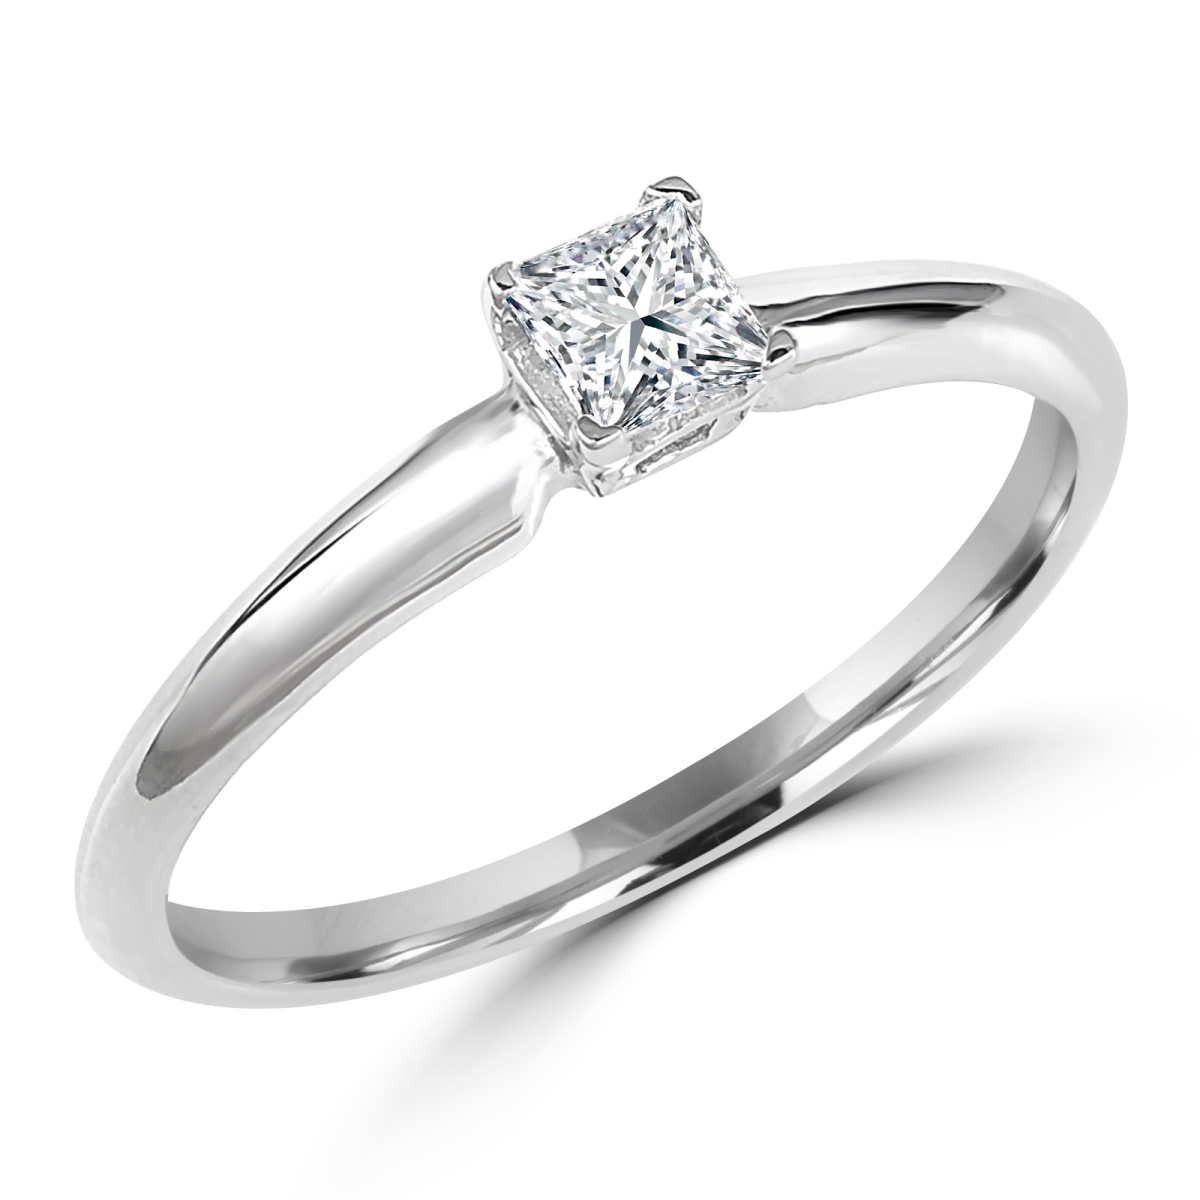 Picture of Majesty Diamonds MD170172-7.75 0.16 CT Princess Diamond Solitaire Engagement Ring in 10K White Gold - 7.75